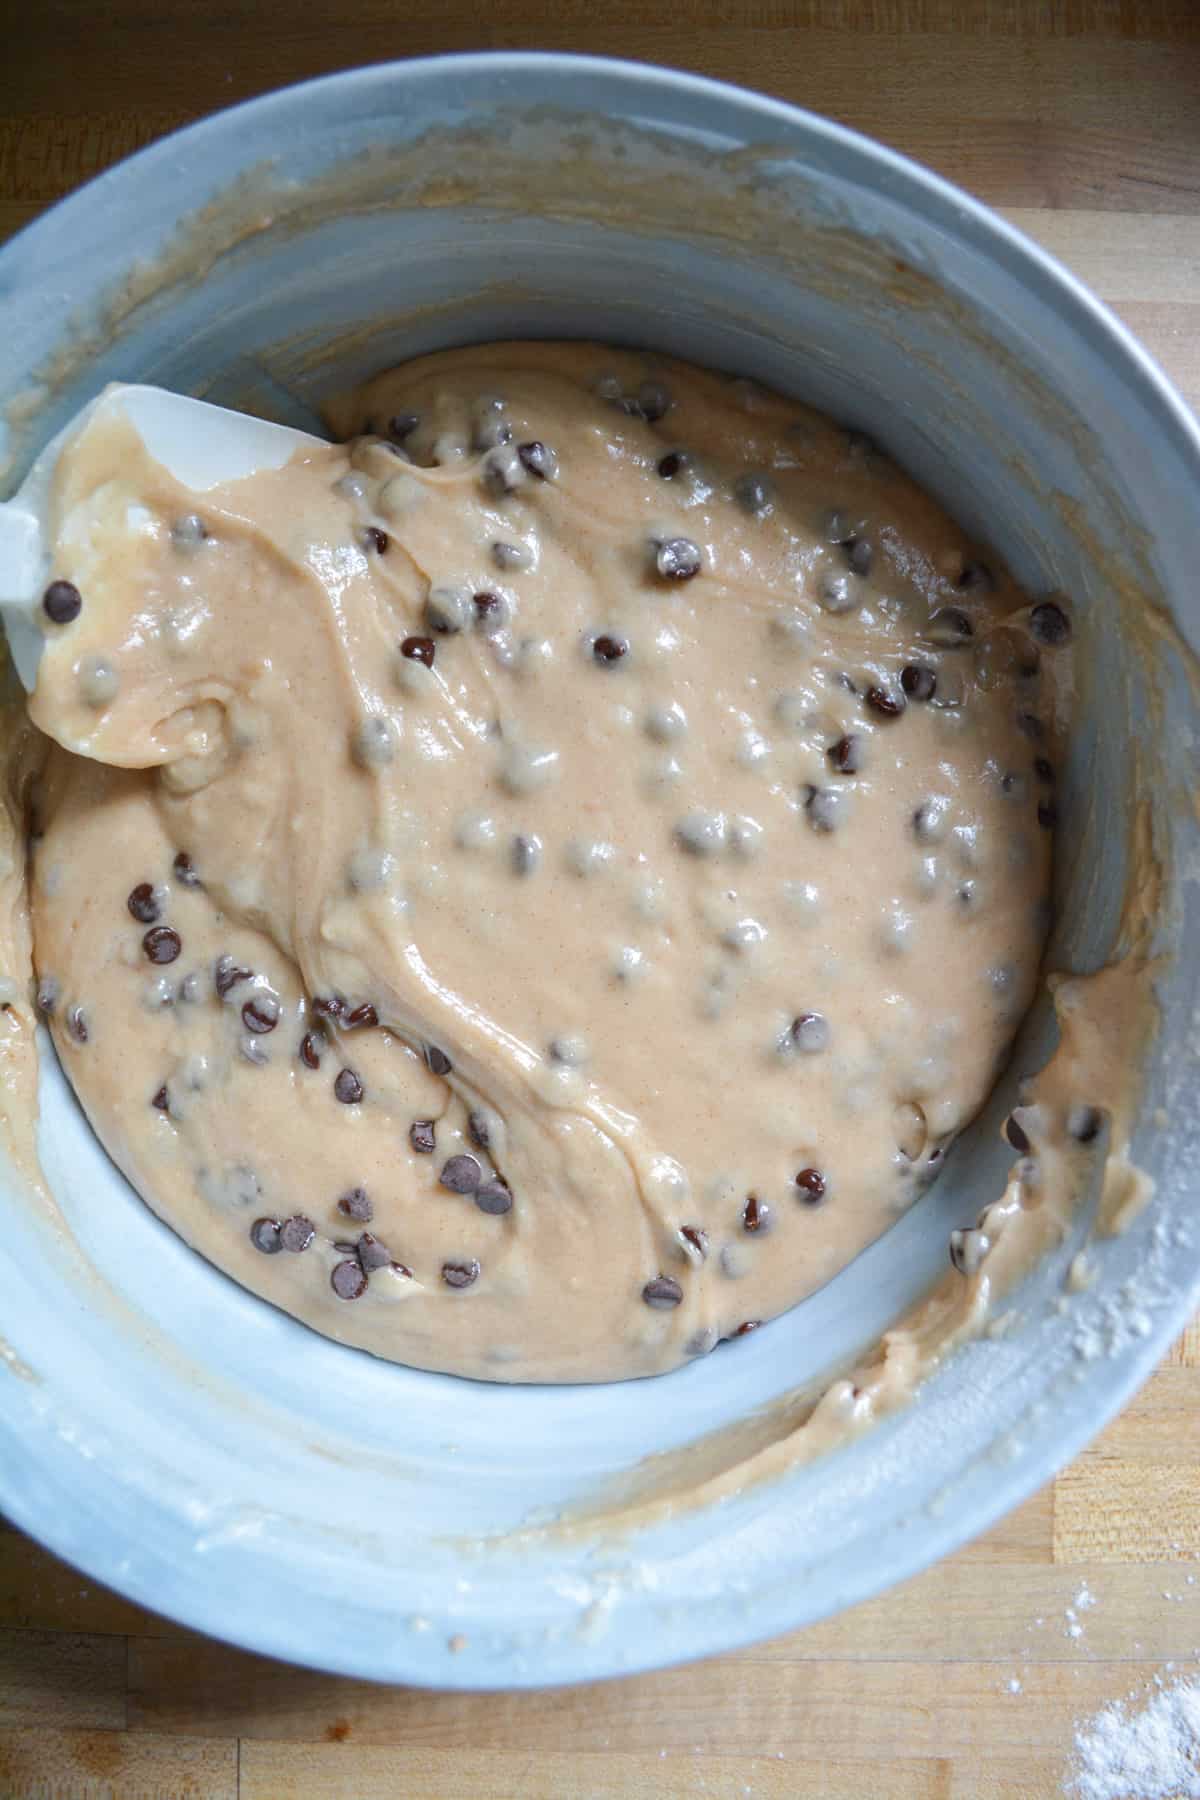 Chocolate chips added into the batter.